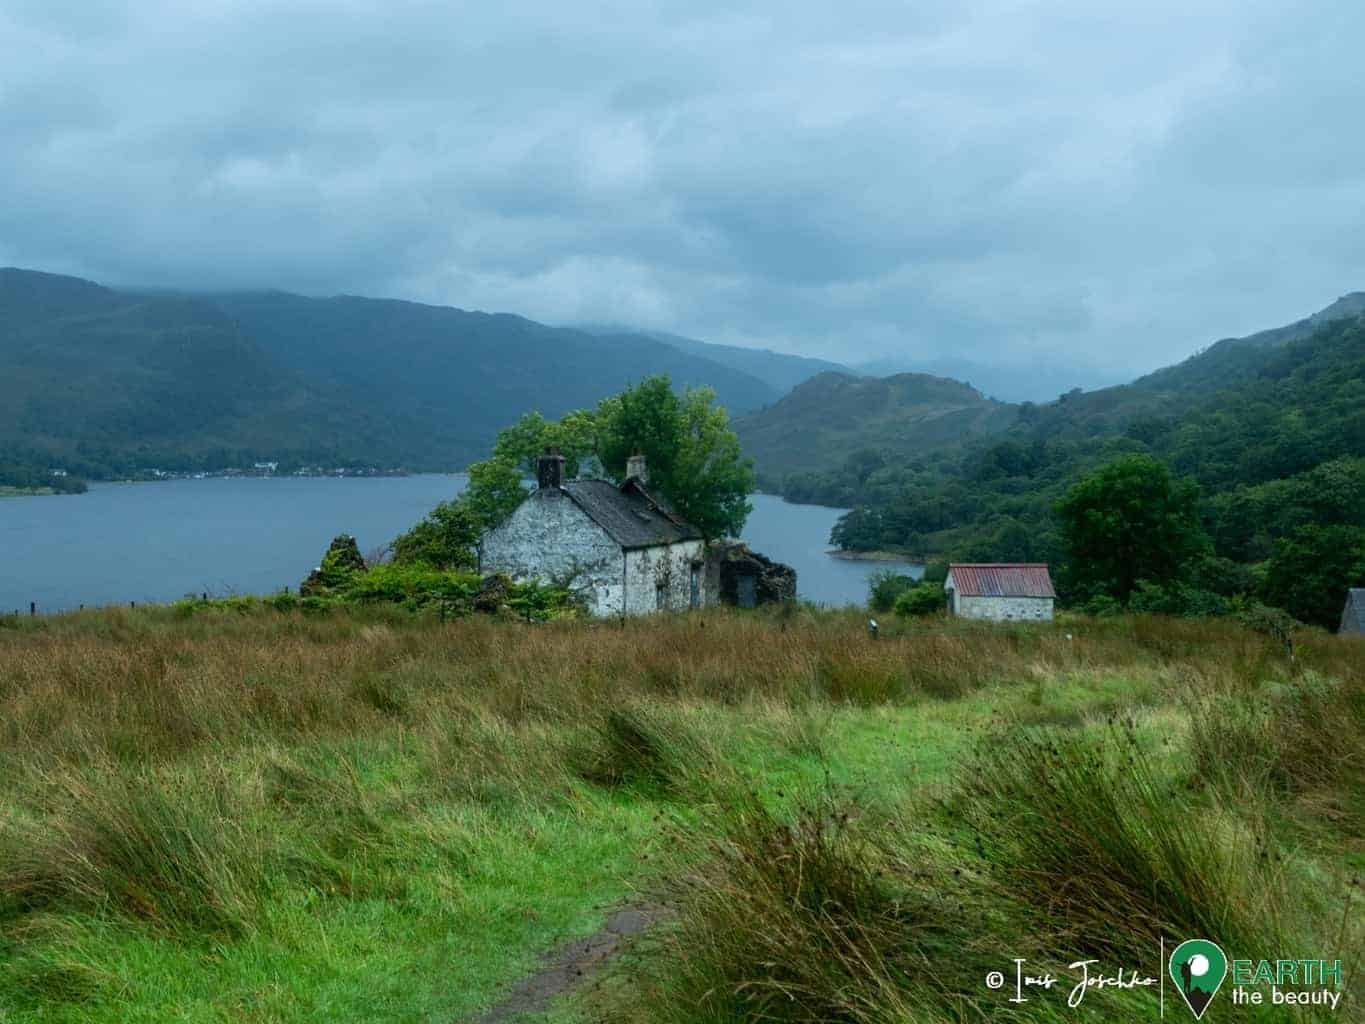 old little houses next to a lake (loch lomond)